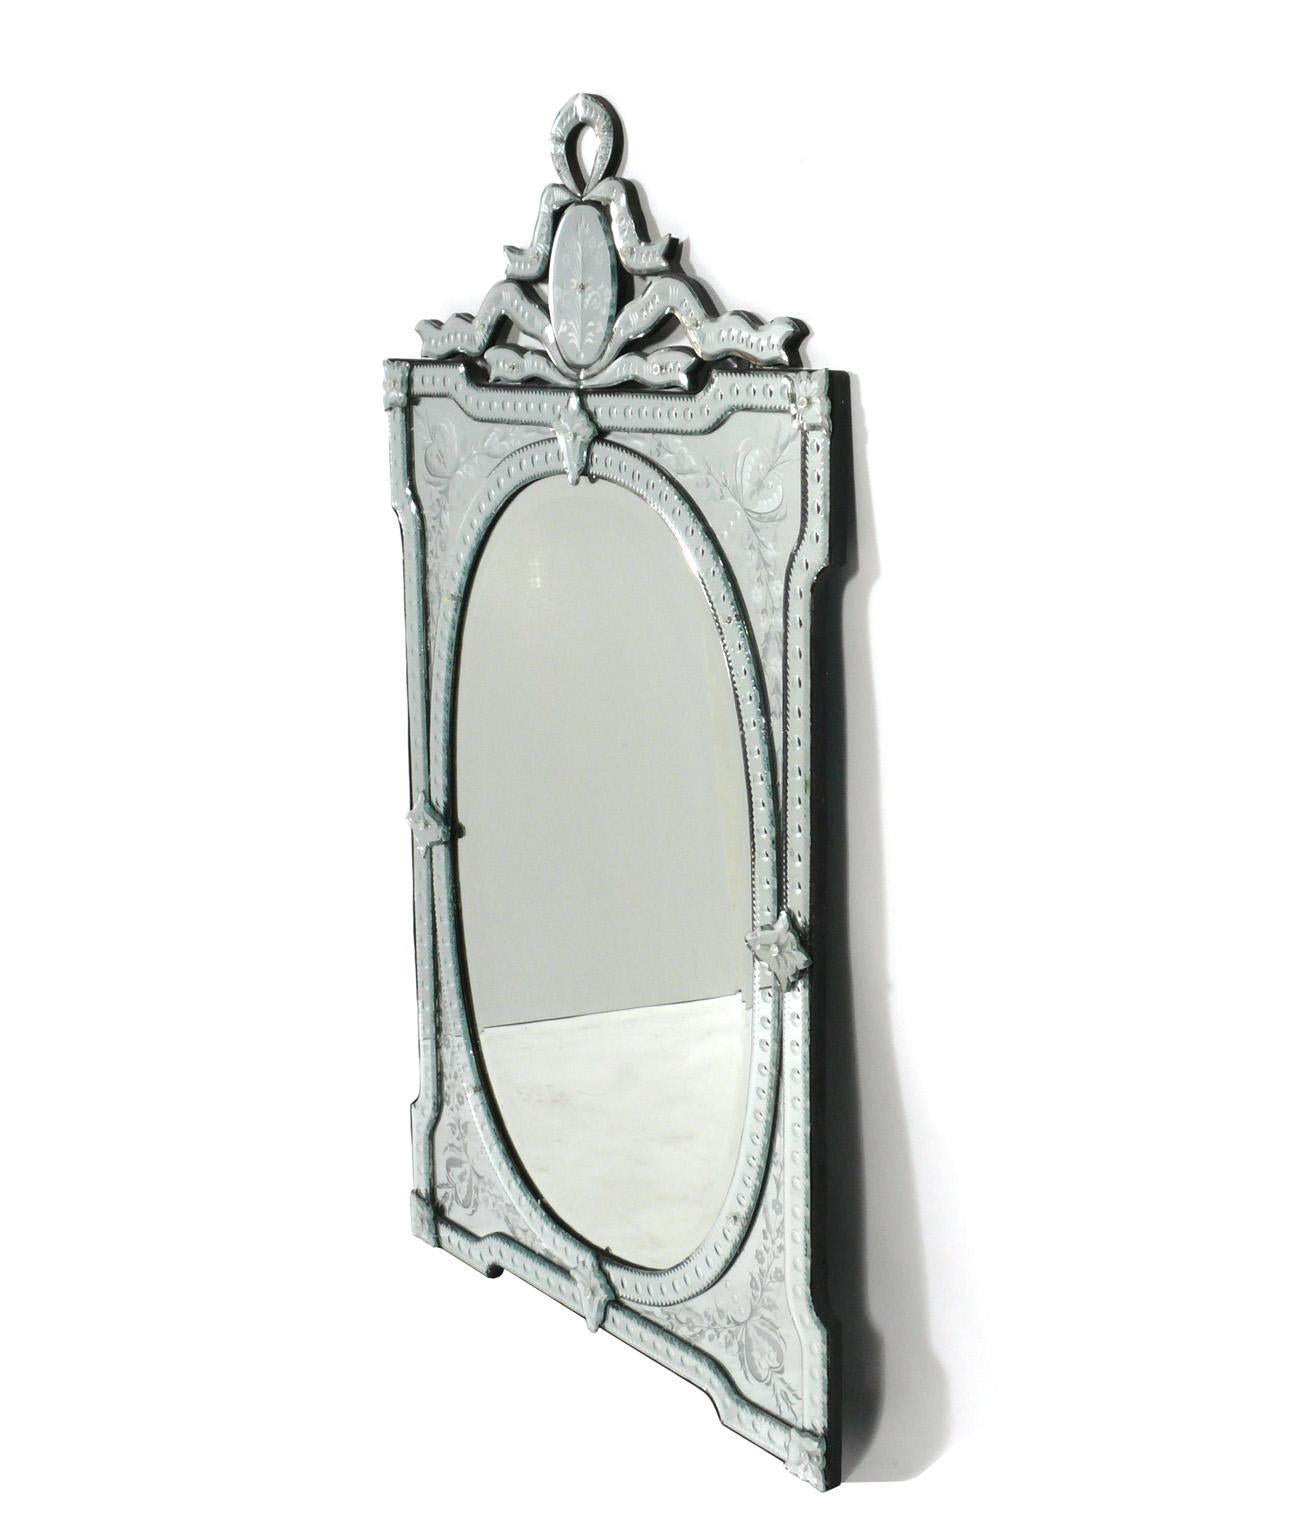 Large Venetian mirror, Italy, circa 1990s. This mirror was recently removed from the legendary Carlyle Hotel in NYC. It measures an impressive 56